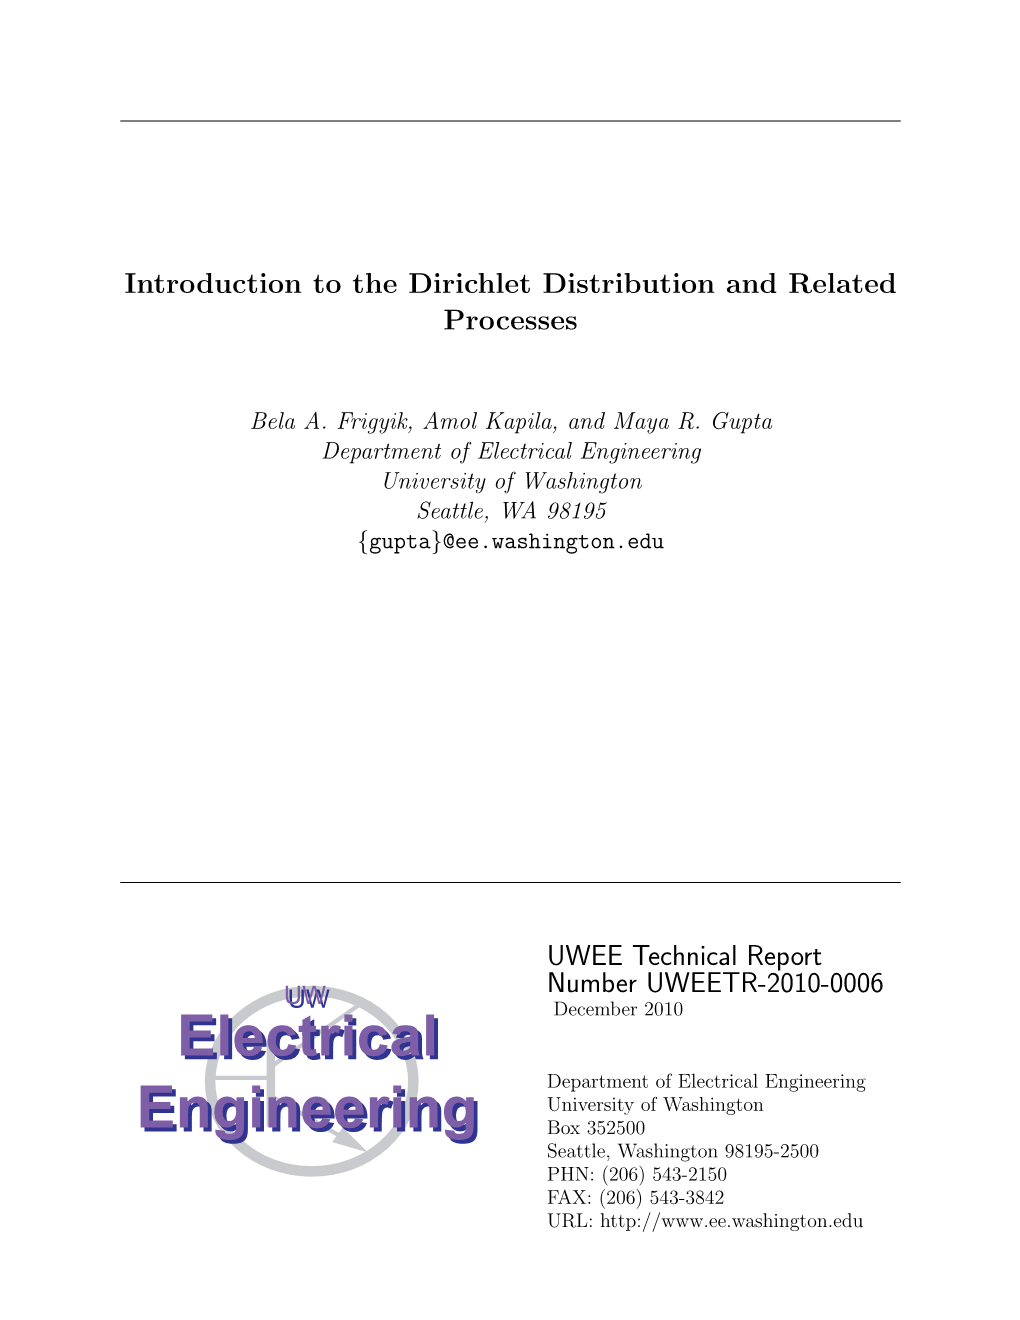 Dirichlet Distribution and Related Processes